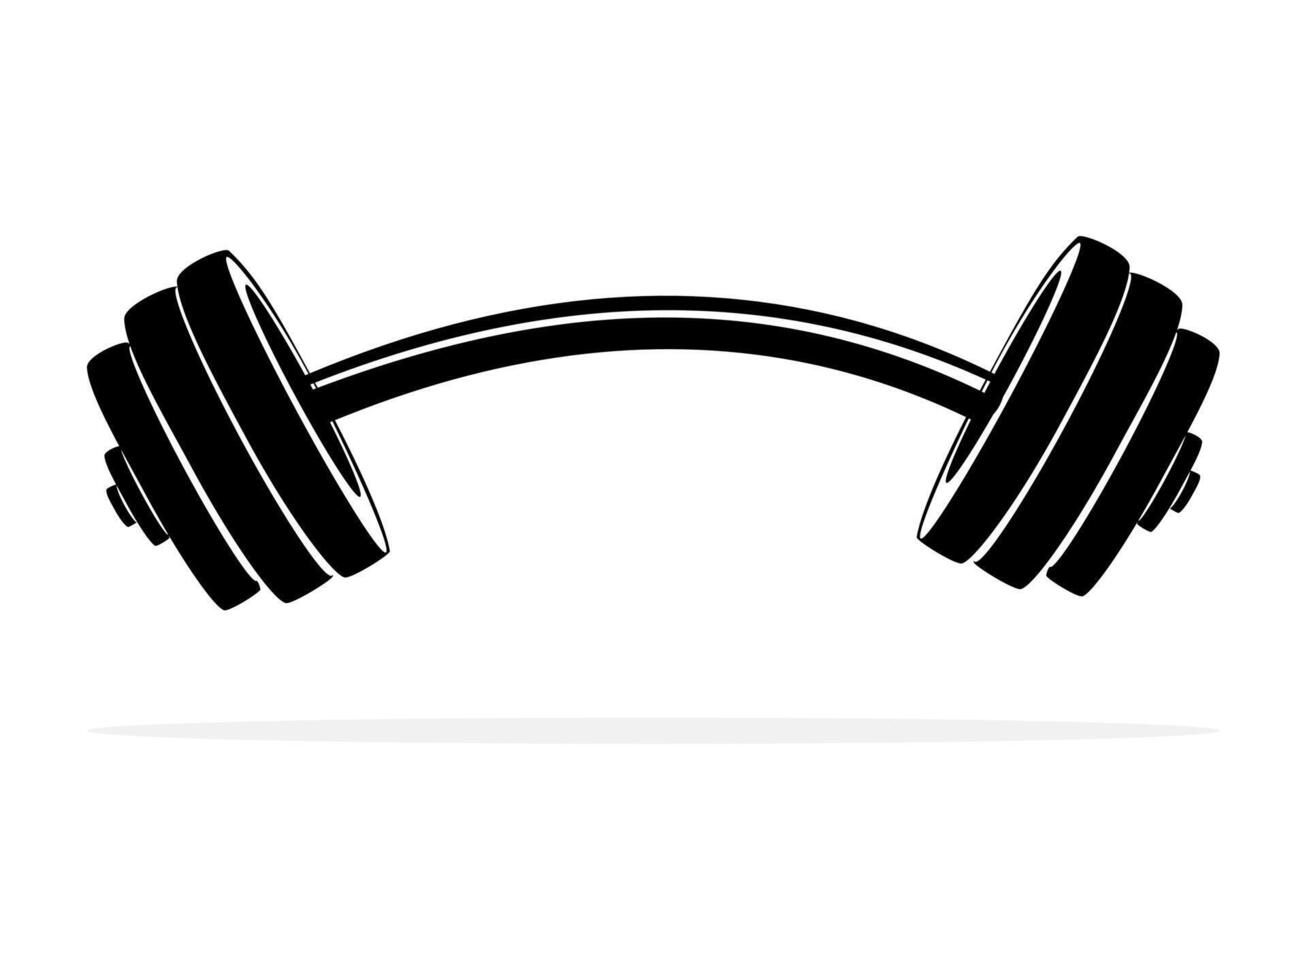 Dumbbell Gym or Barbell icon vector